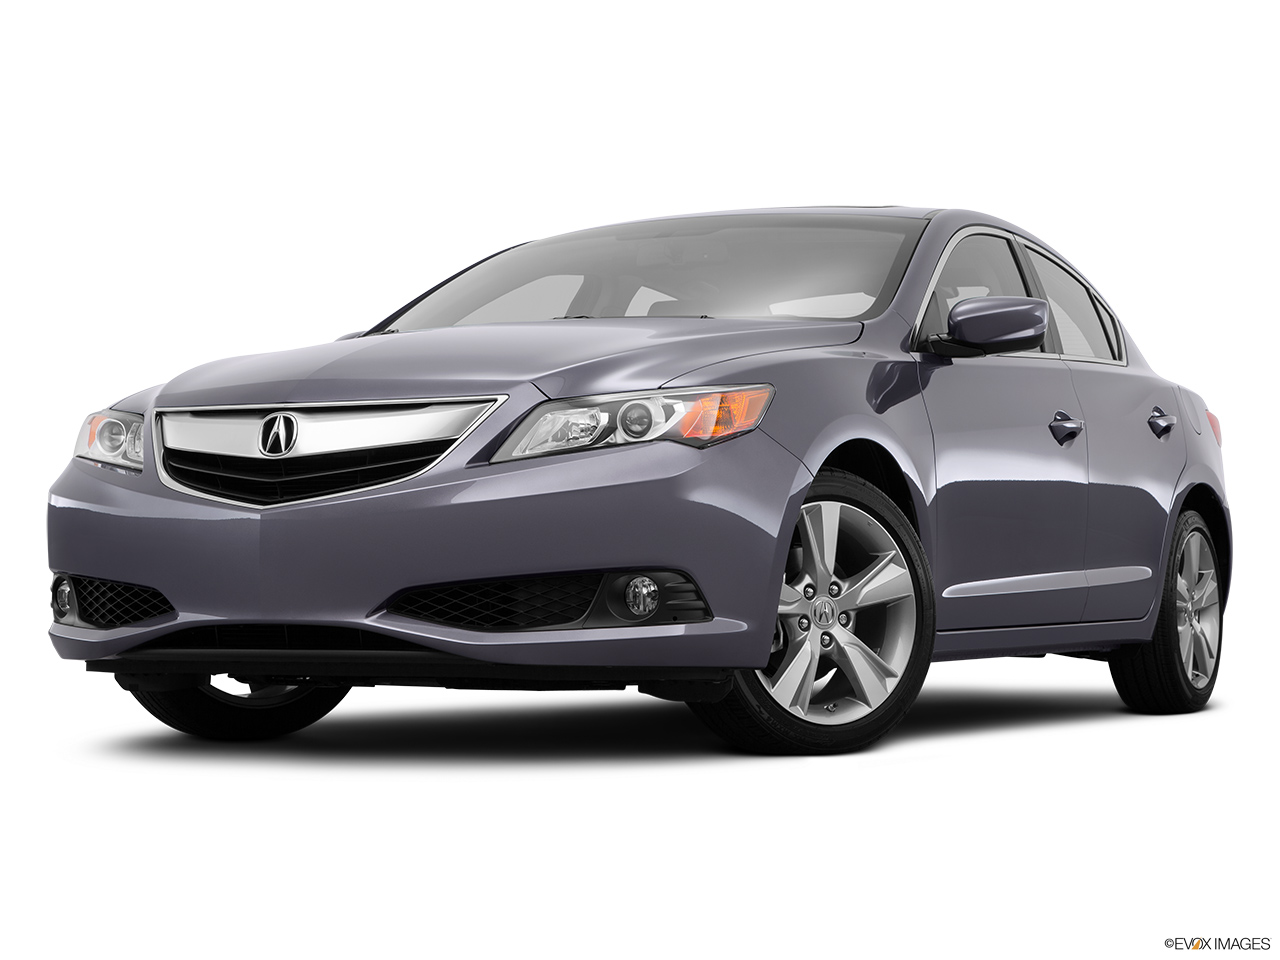 2015 Acura ILX 5-Speed Automatic Front angle view, low wide perspective. 